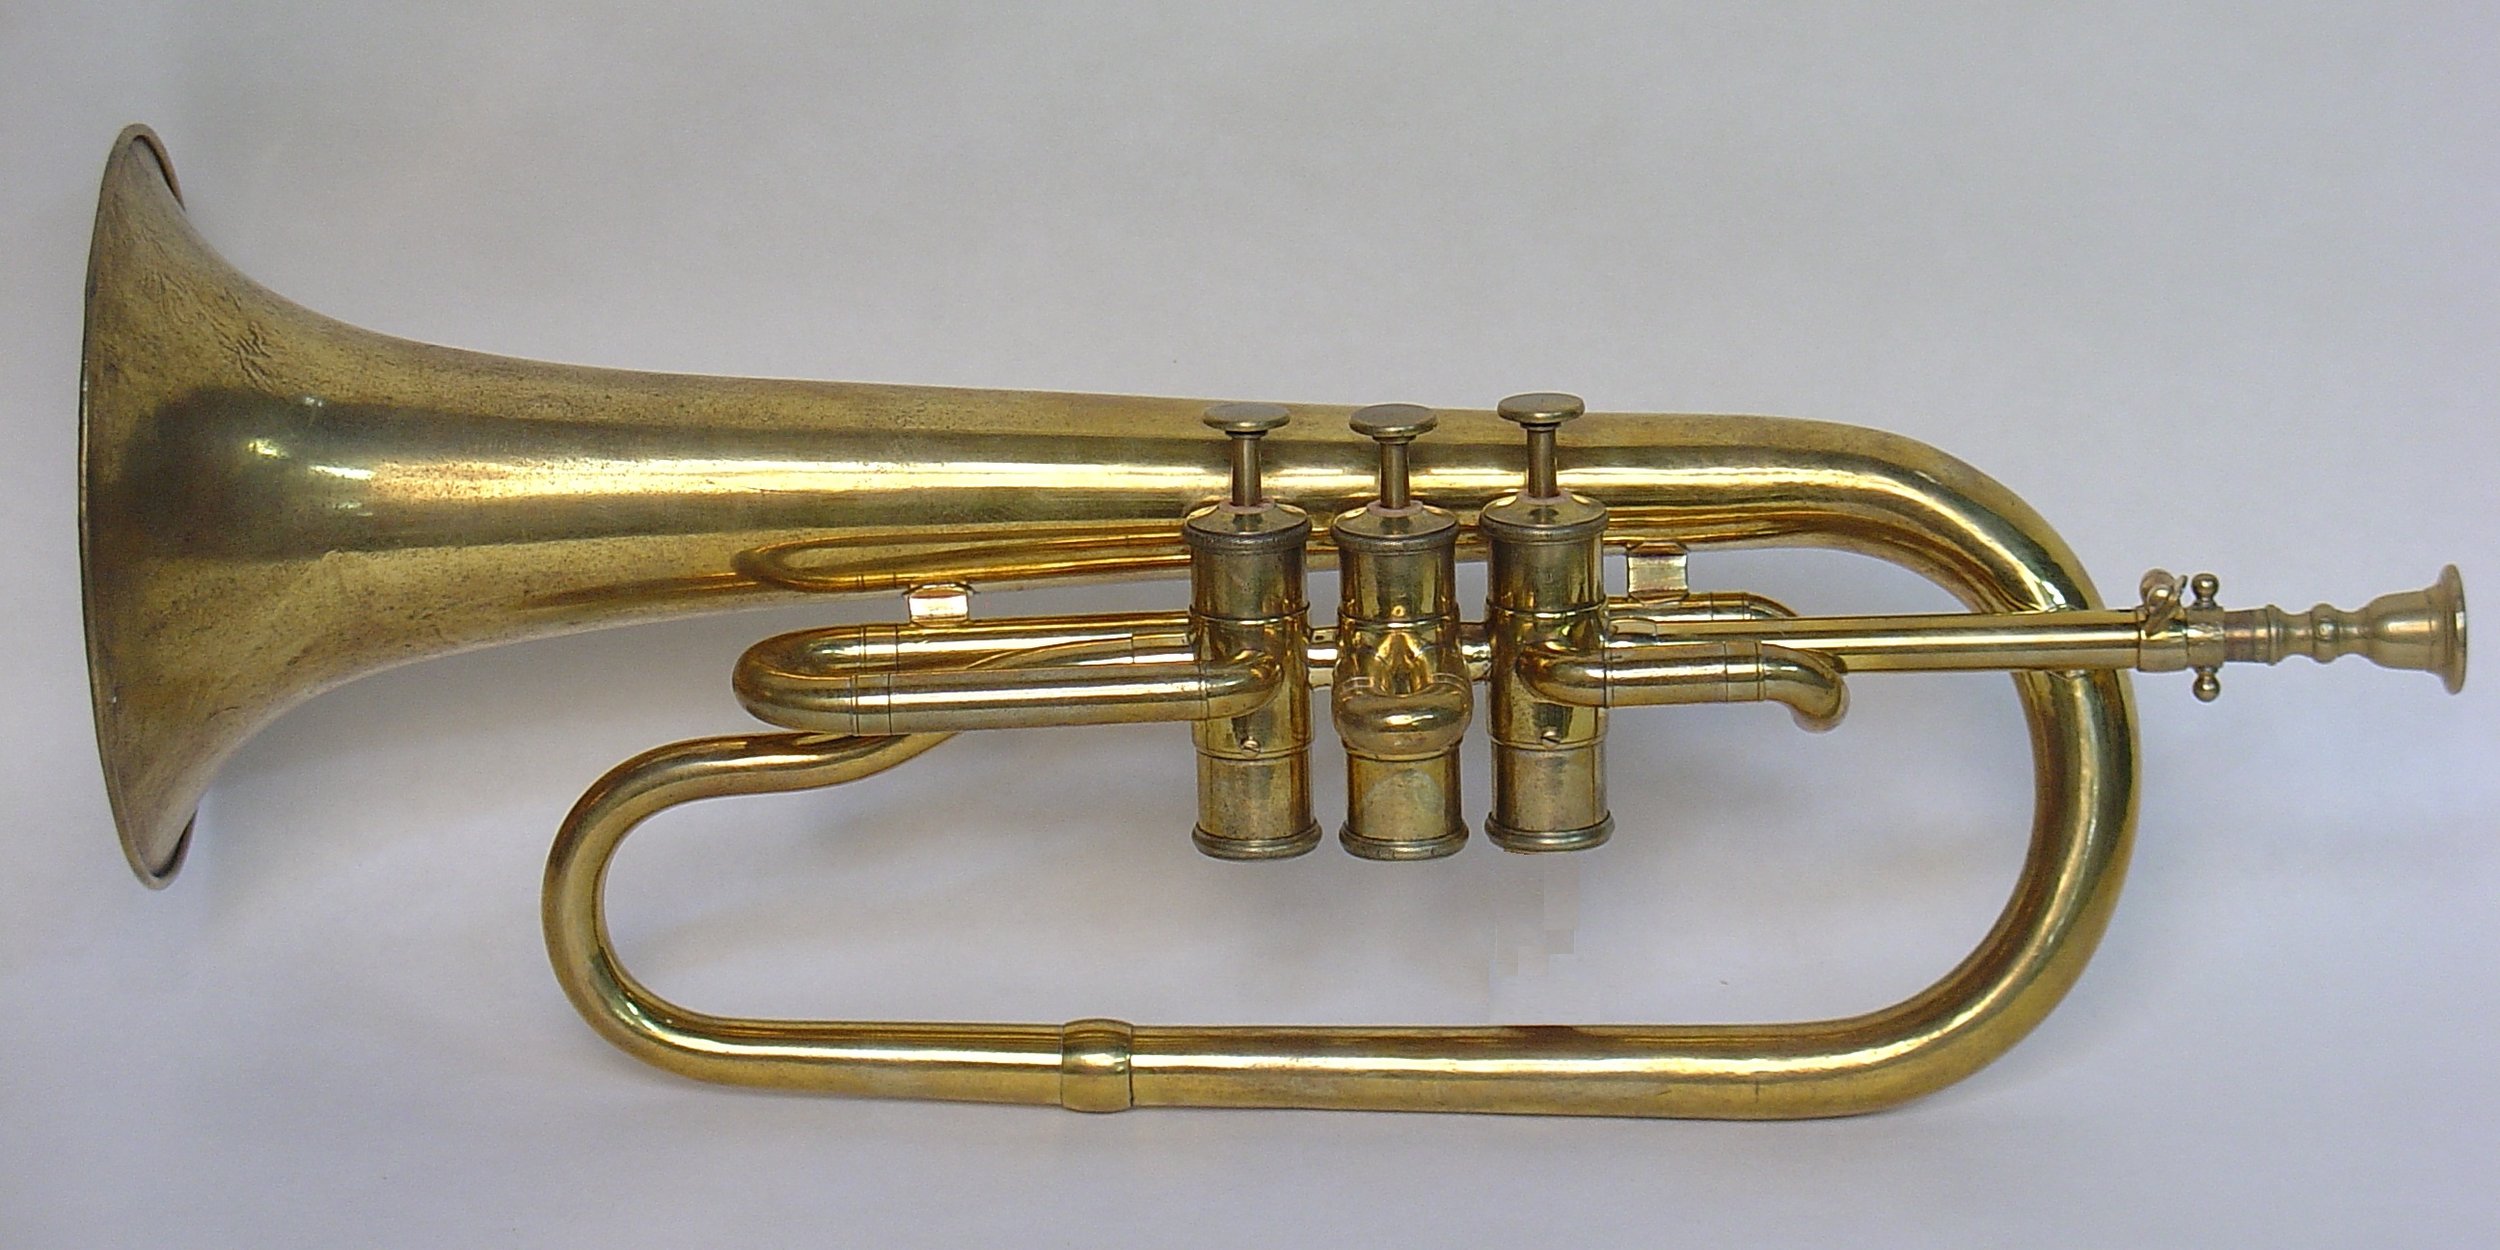 1840s Saxhorn, Paris and New Orleans